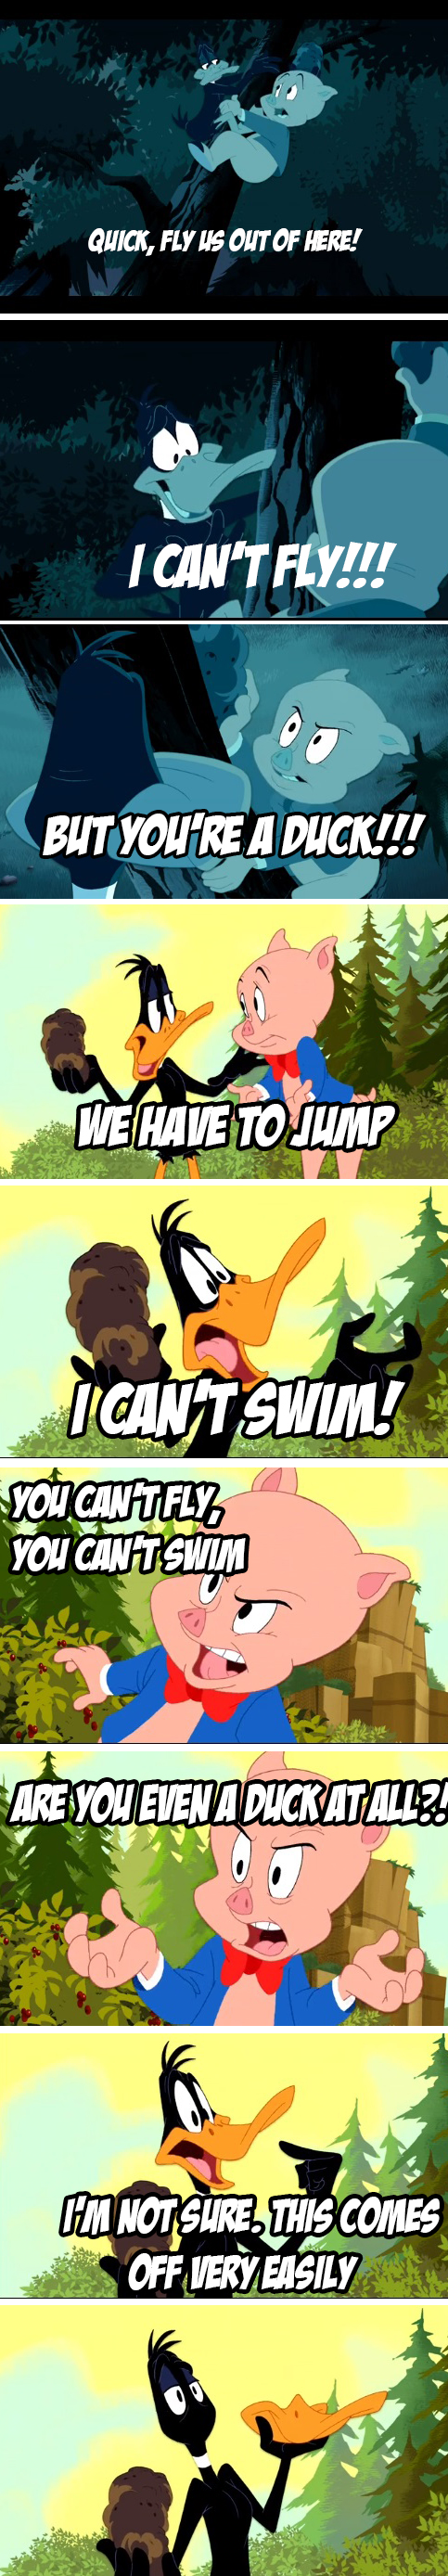 Even Daffy isn't sure anymore